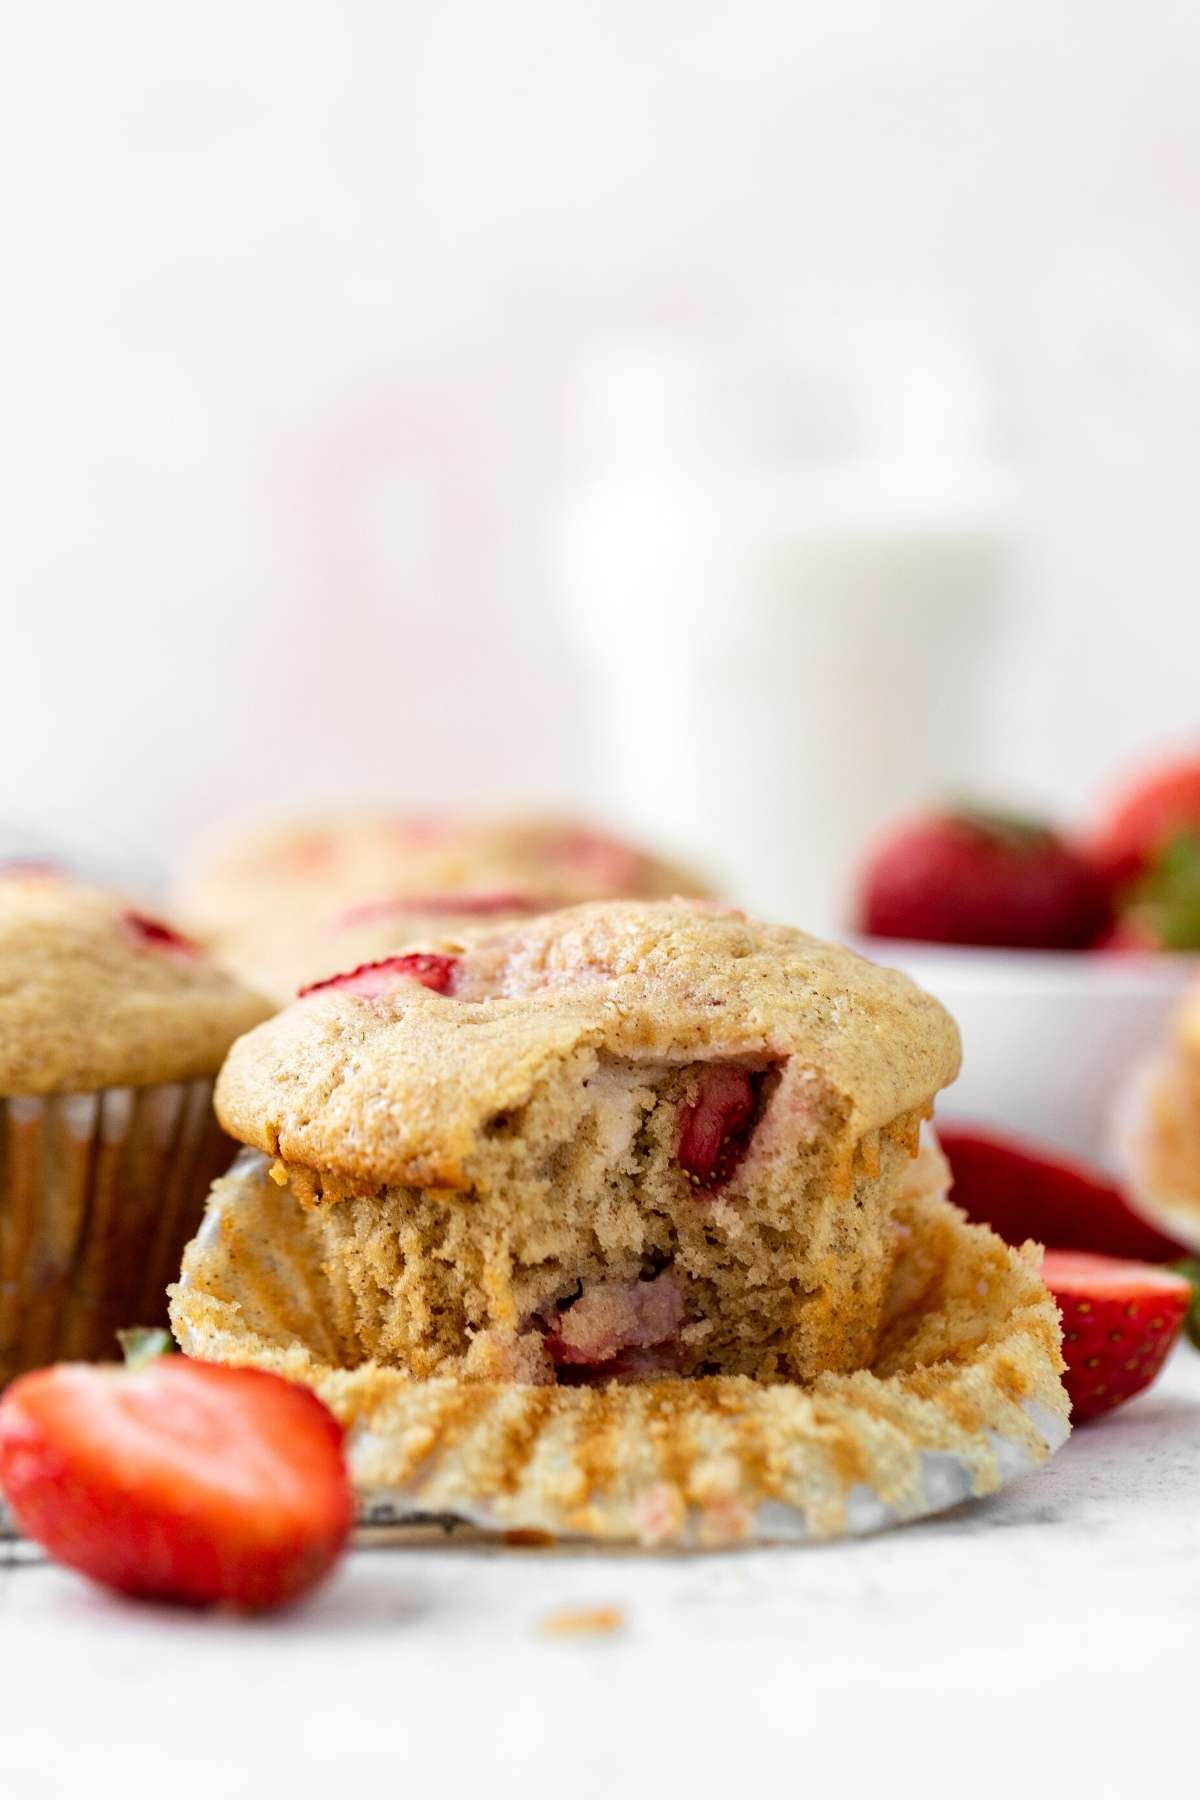 Strawberry Muffins with liner open and bite taken